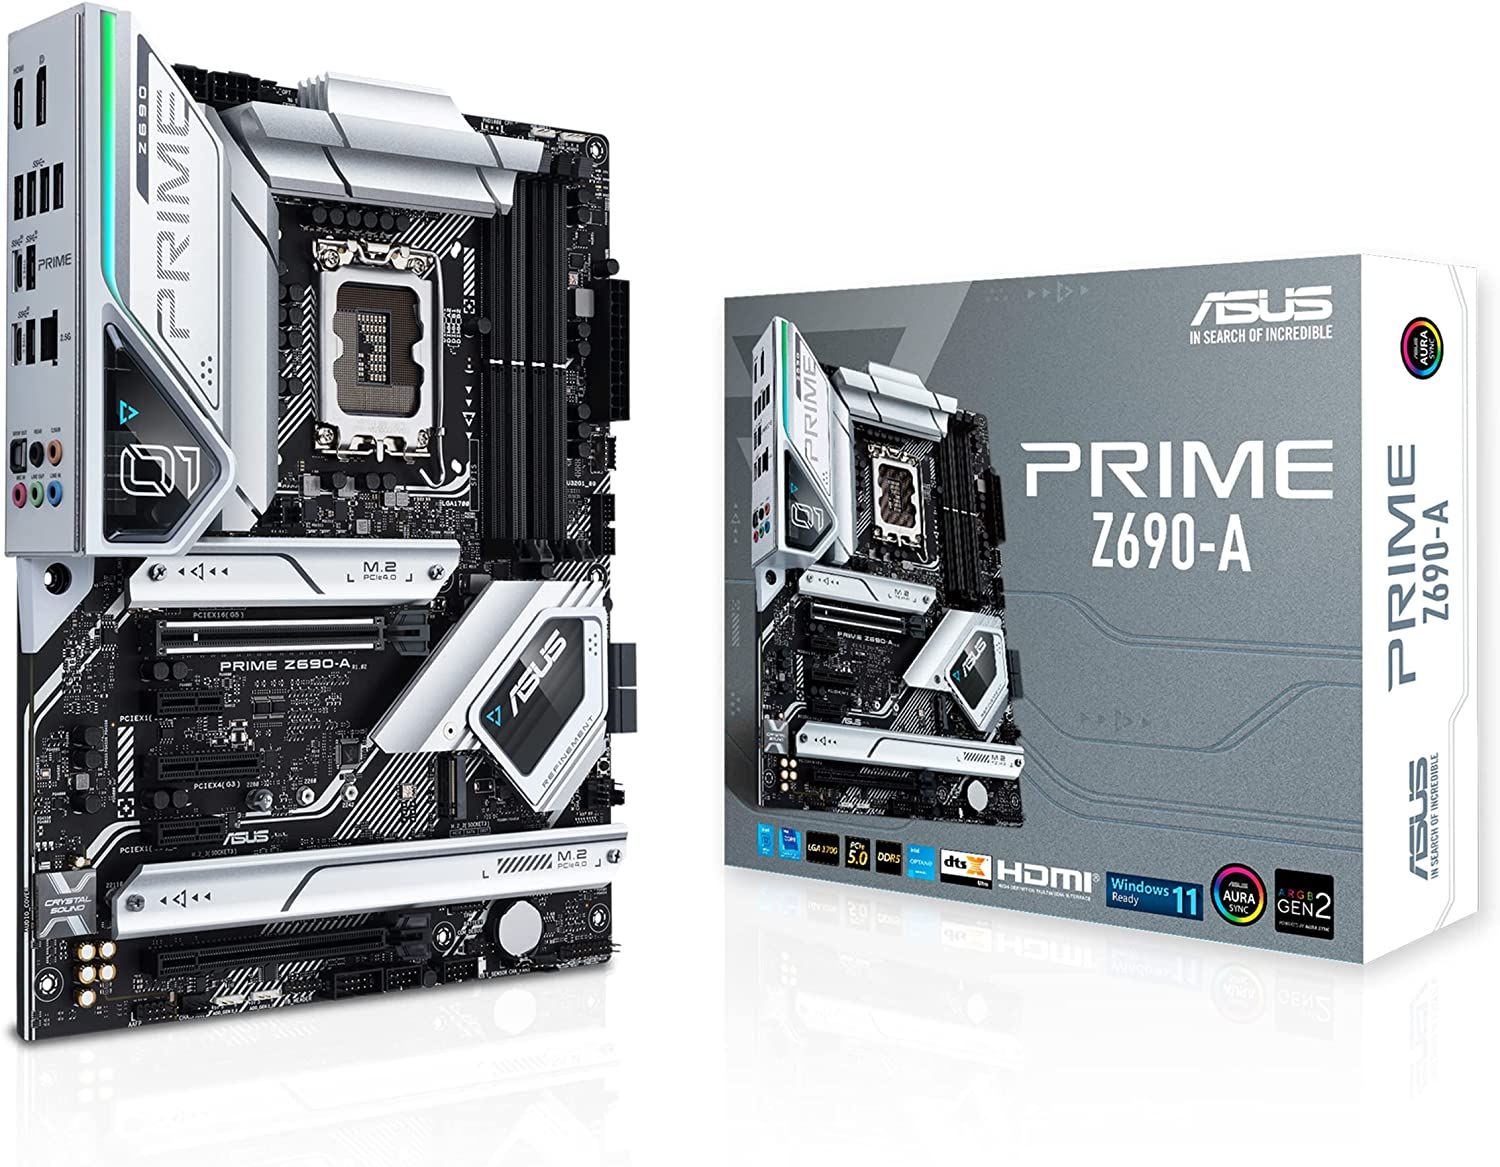 An image showing the complete ASUS Prime Z690-A package